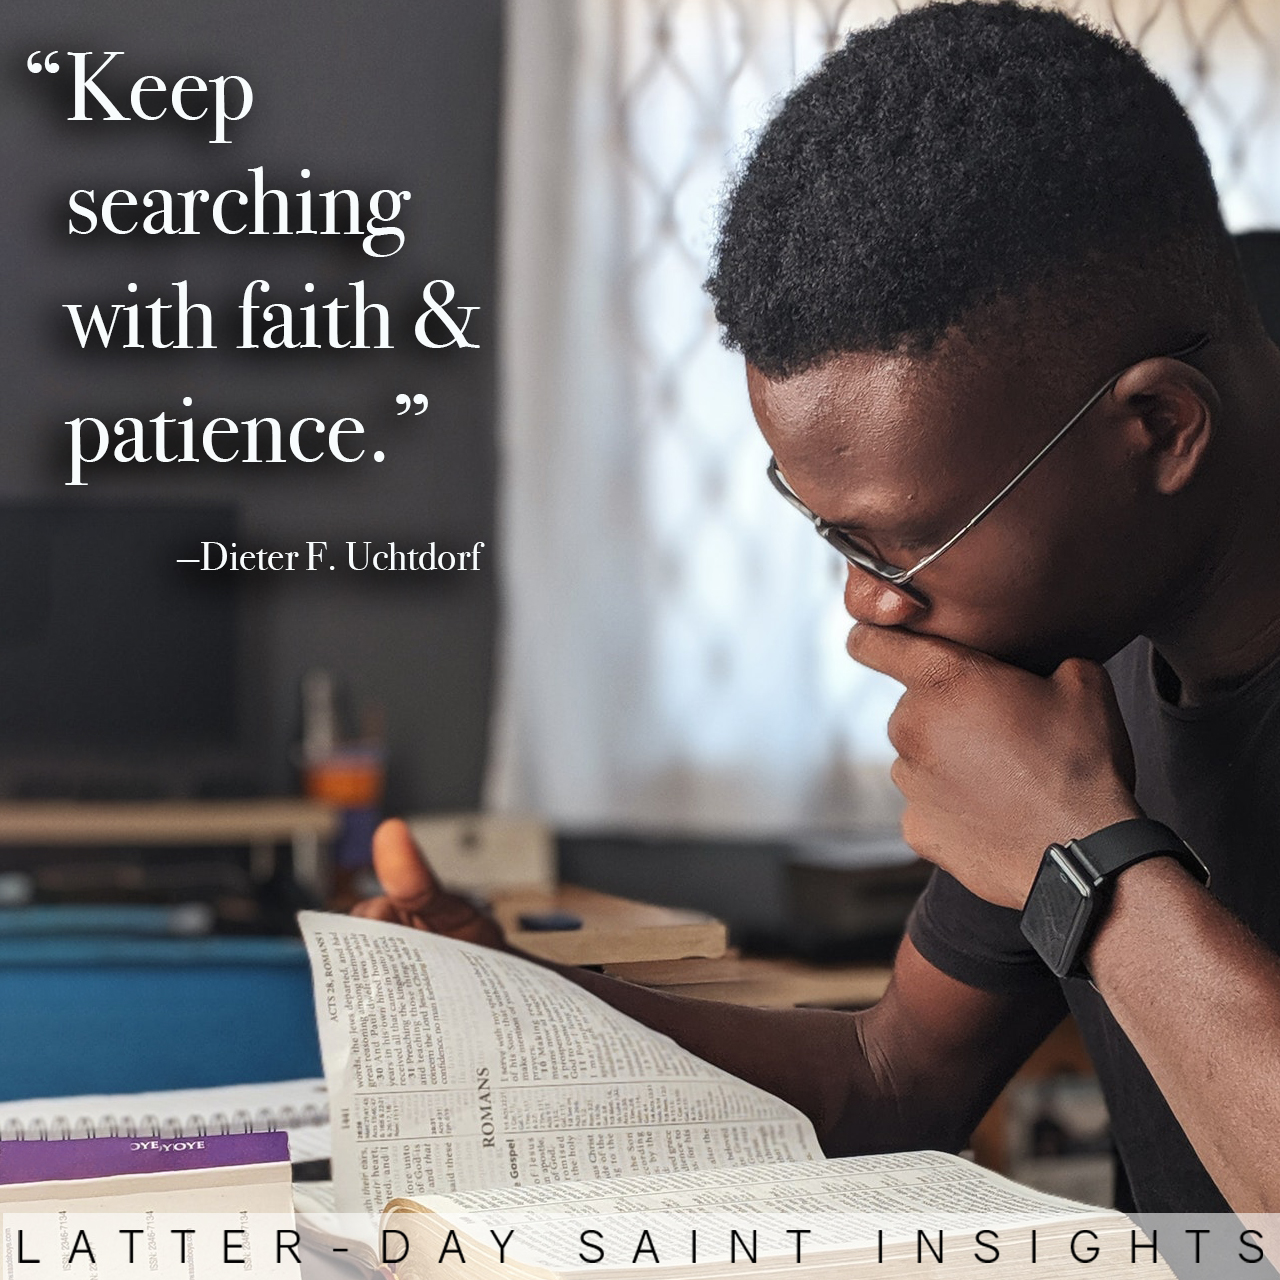 "Keep searching with faith and patience."-Dieter F. Uchtdorf